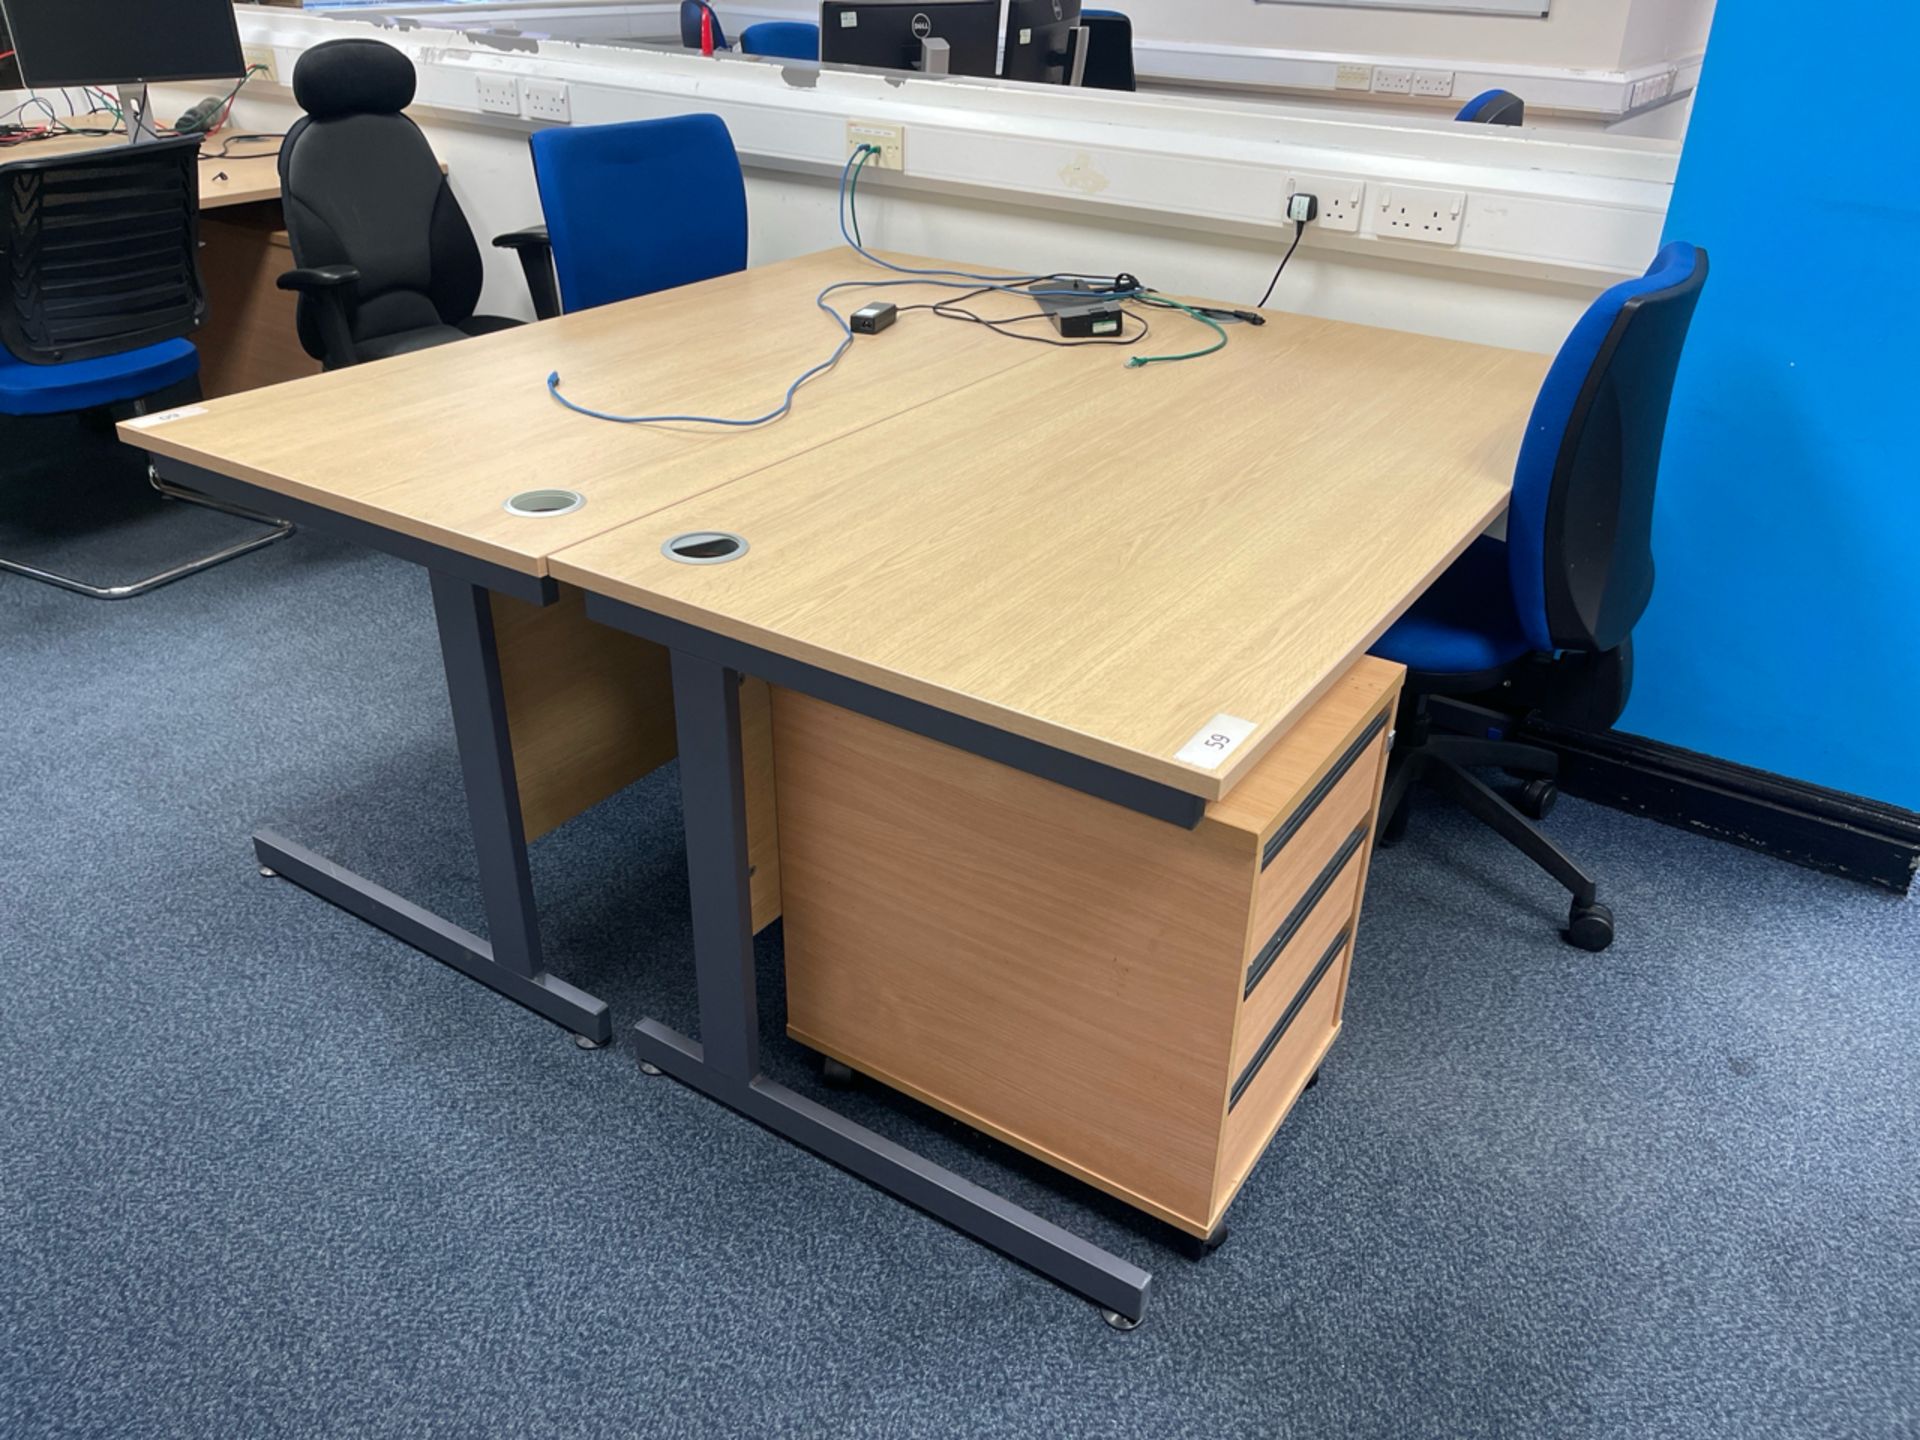 ref 85 - Pair Of Office Desks, Chairs